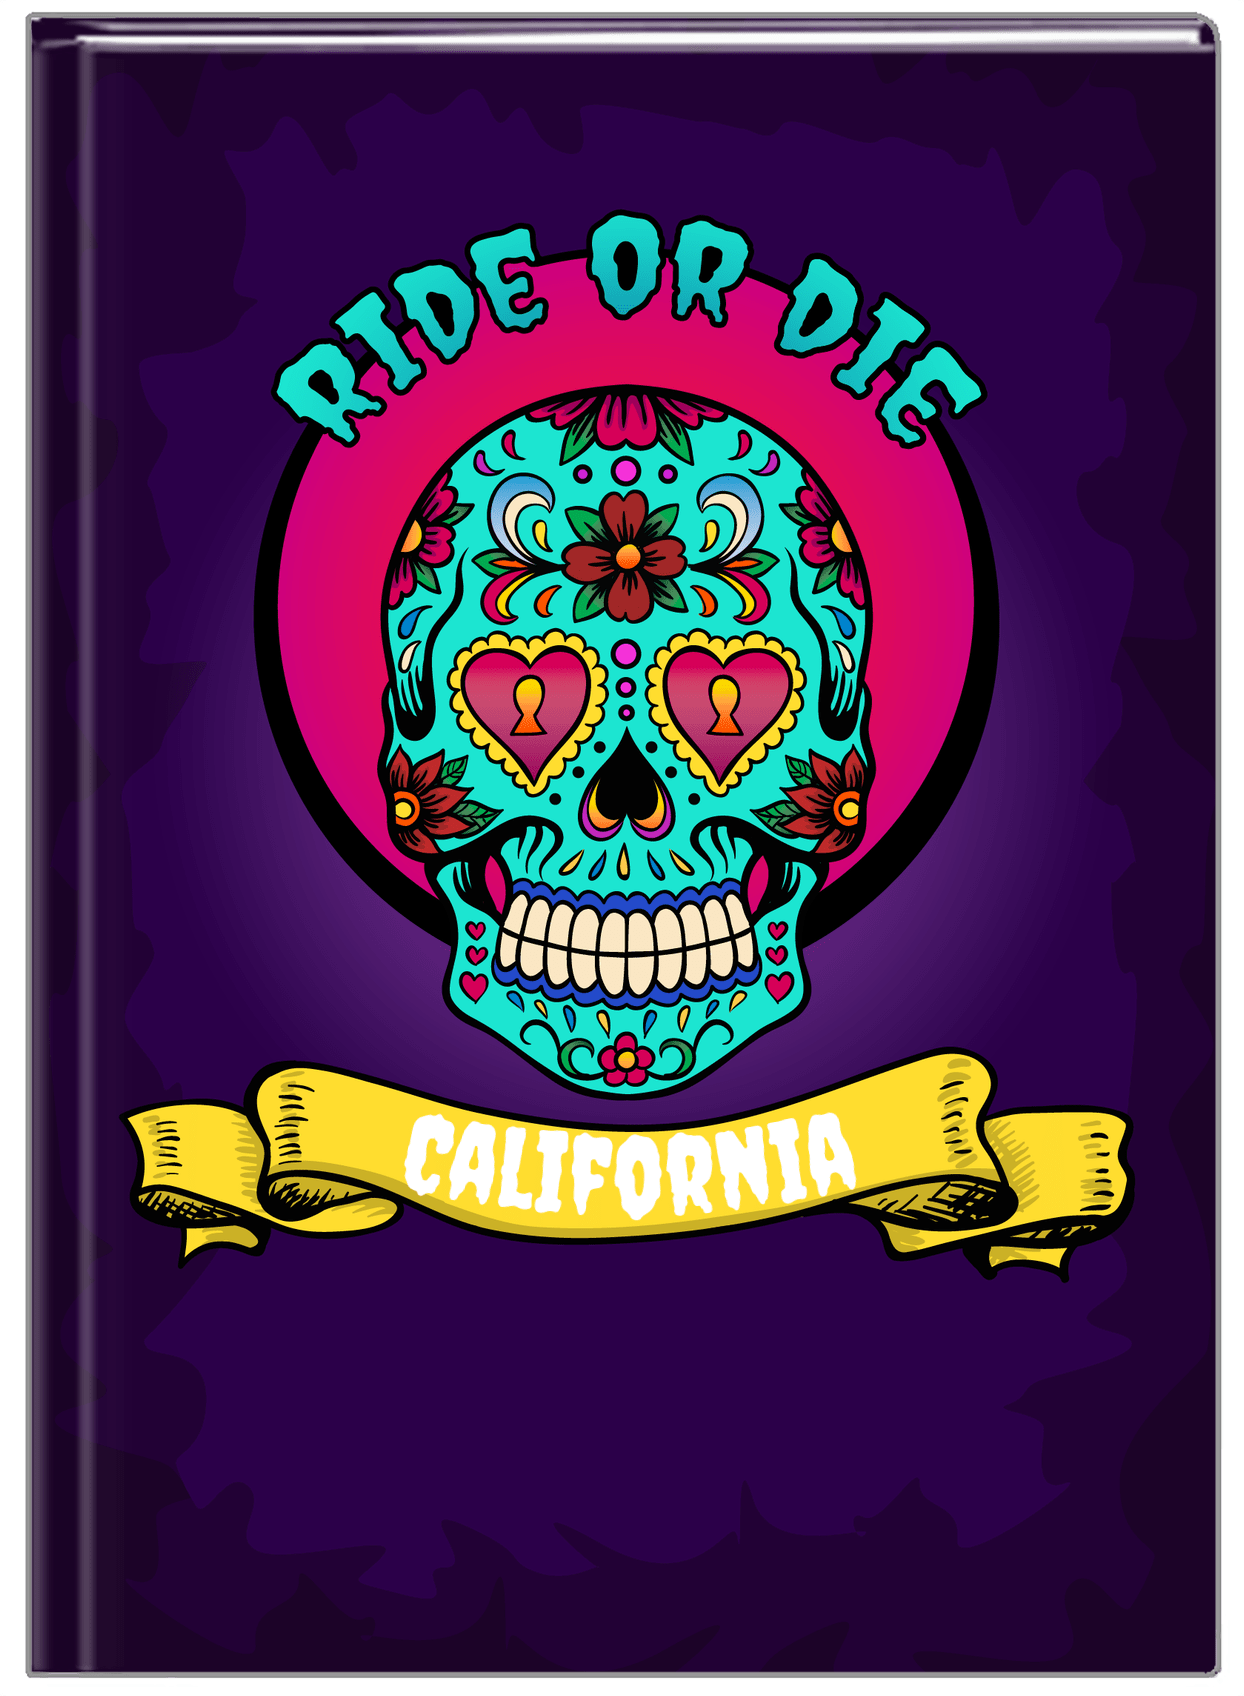 Personalized Sugar Skulls Journal - Ride or Die - Front View